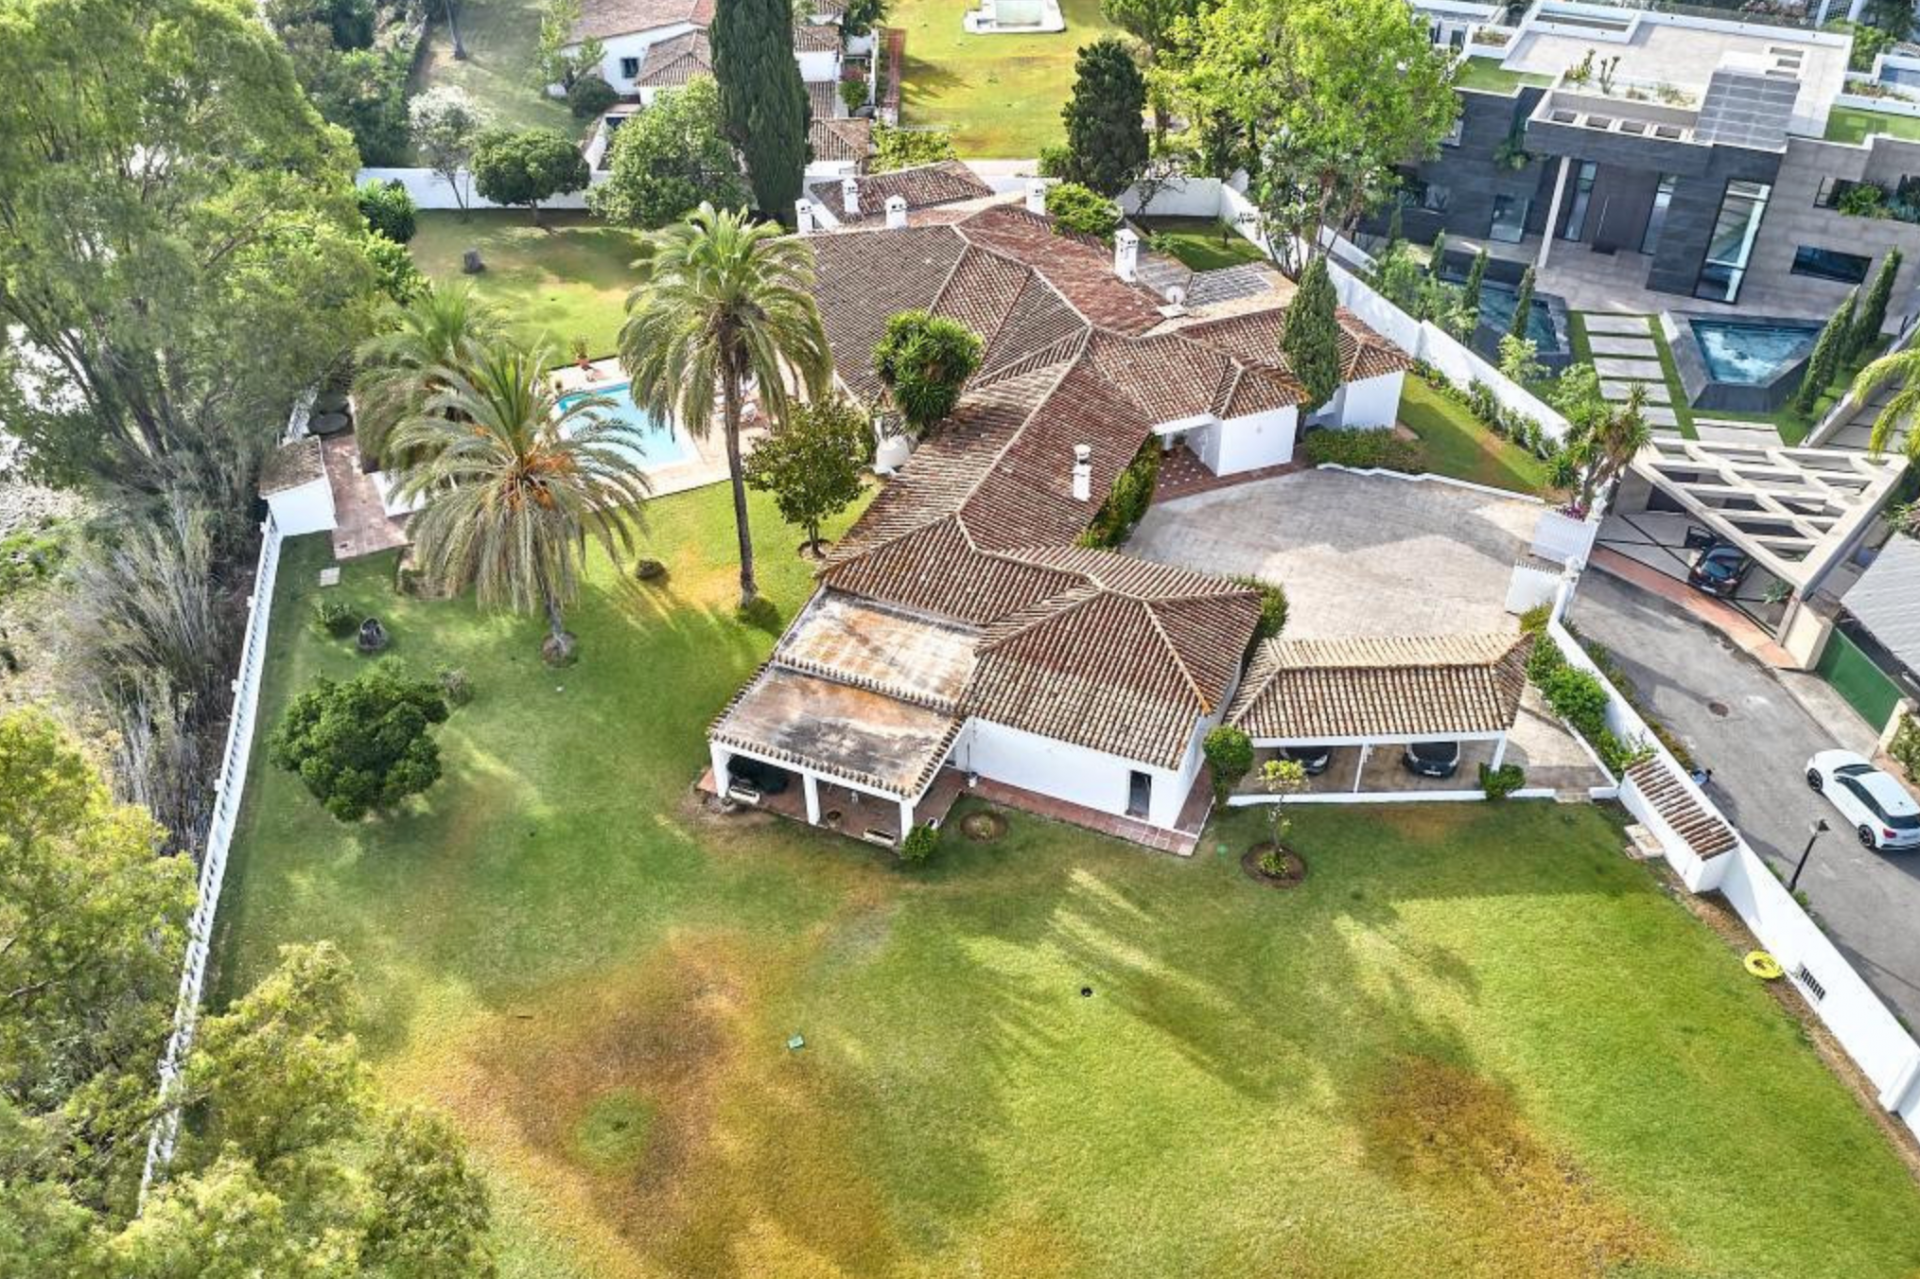 Beautiful Andalusian-style villa set in an extensive plot of more than 4000 m2 on the edge of one of the most prestigious golf courses in Casasola / Guadalmina Baja